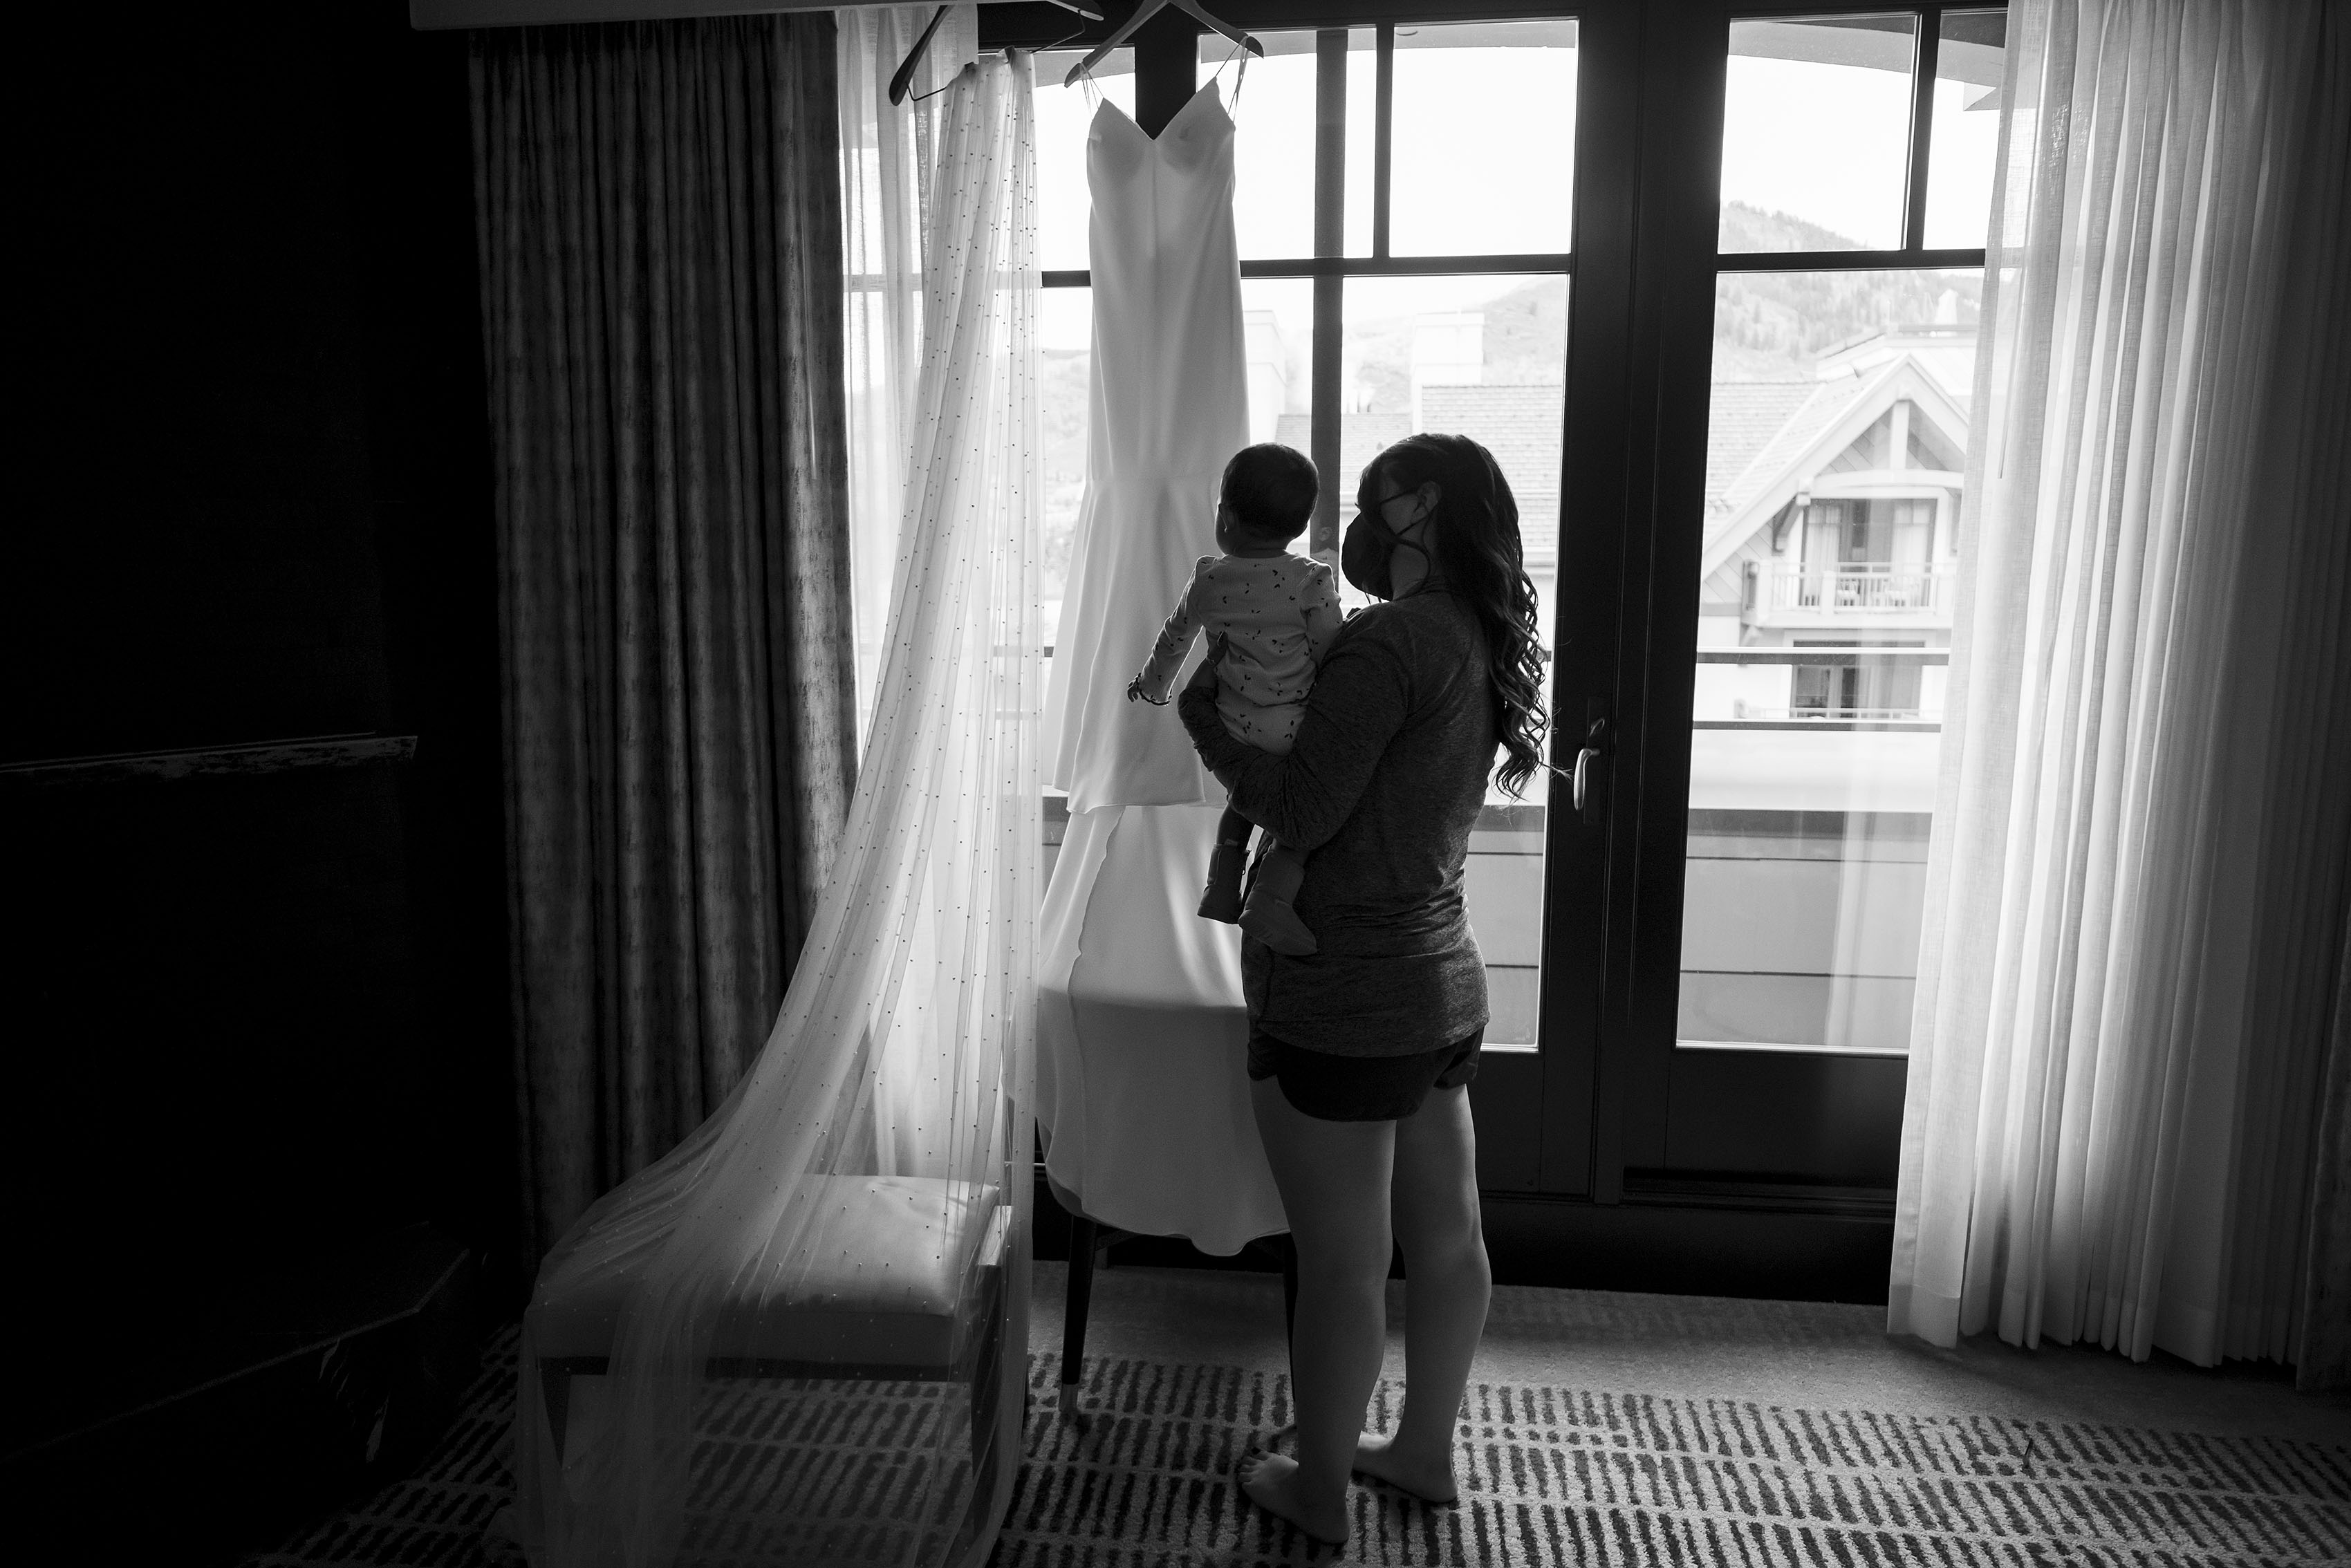 The bride's niece admires the wedding dress on the wedding day